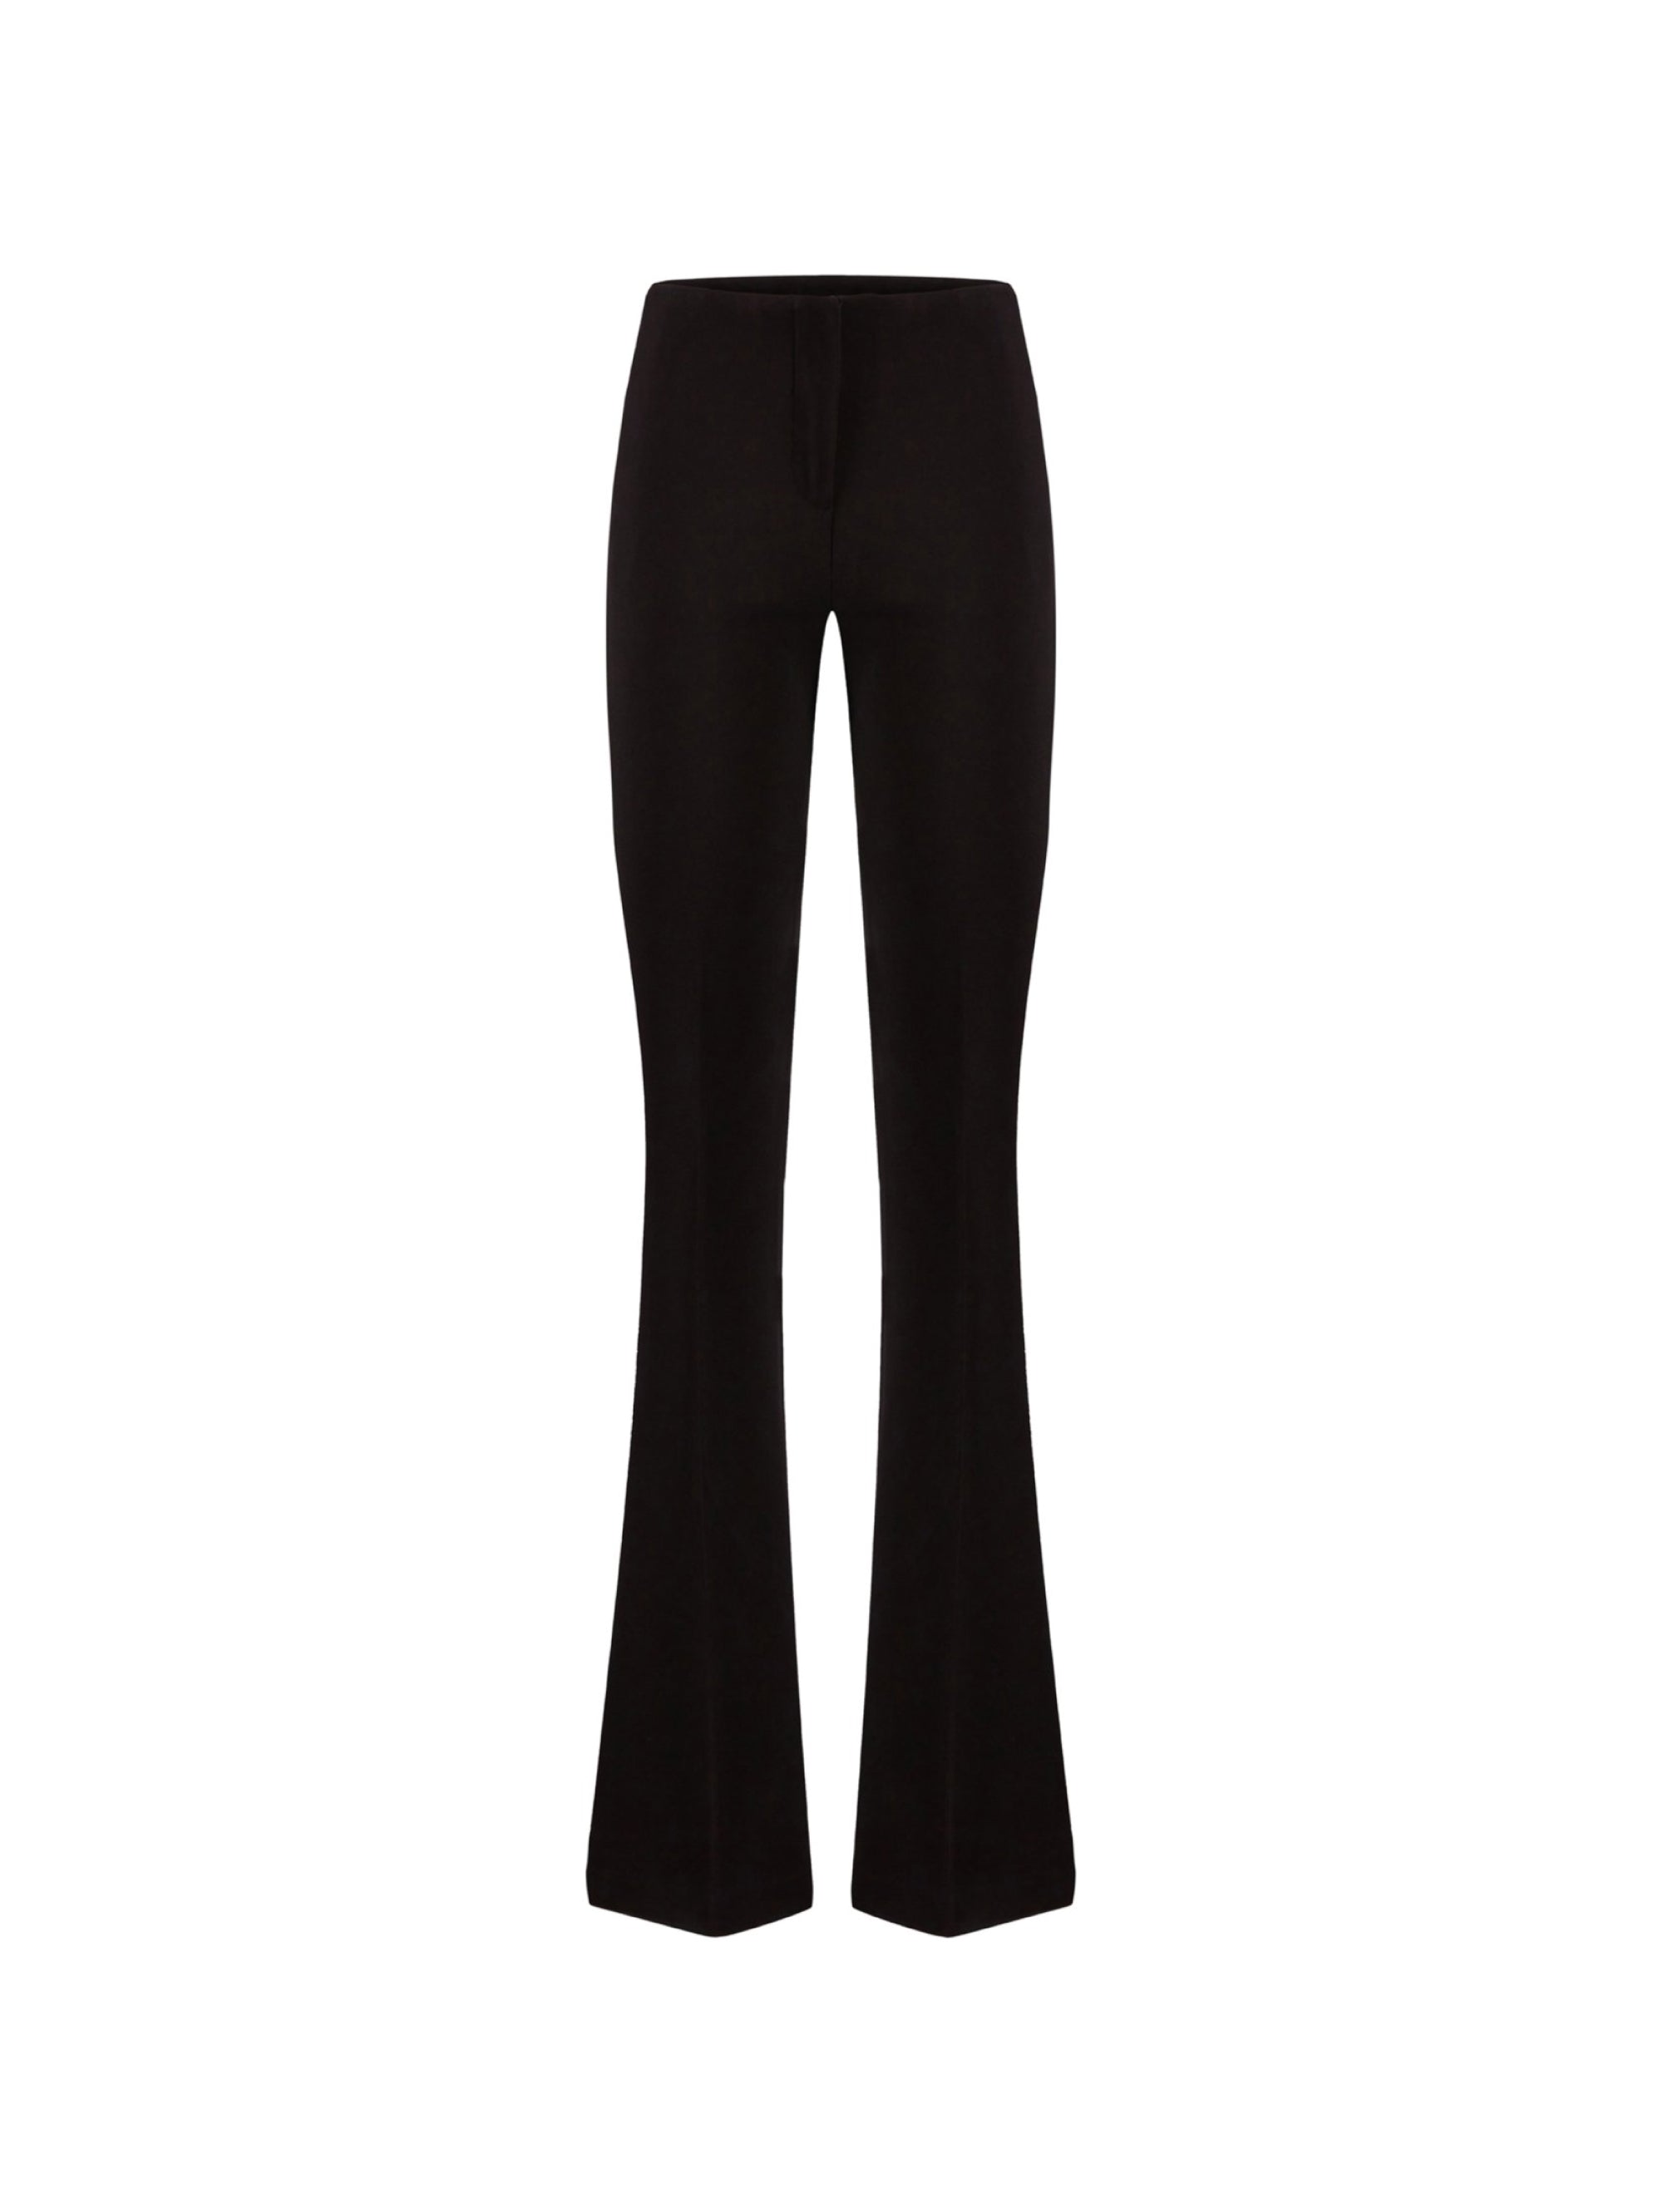 Flared Trousers in Black Crepe Stitch Fabric